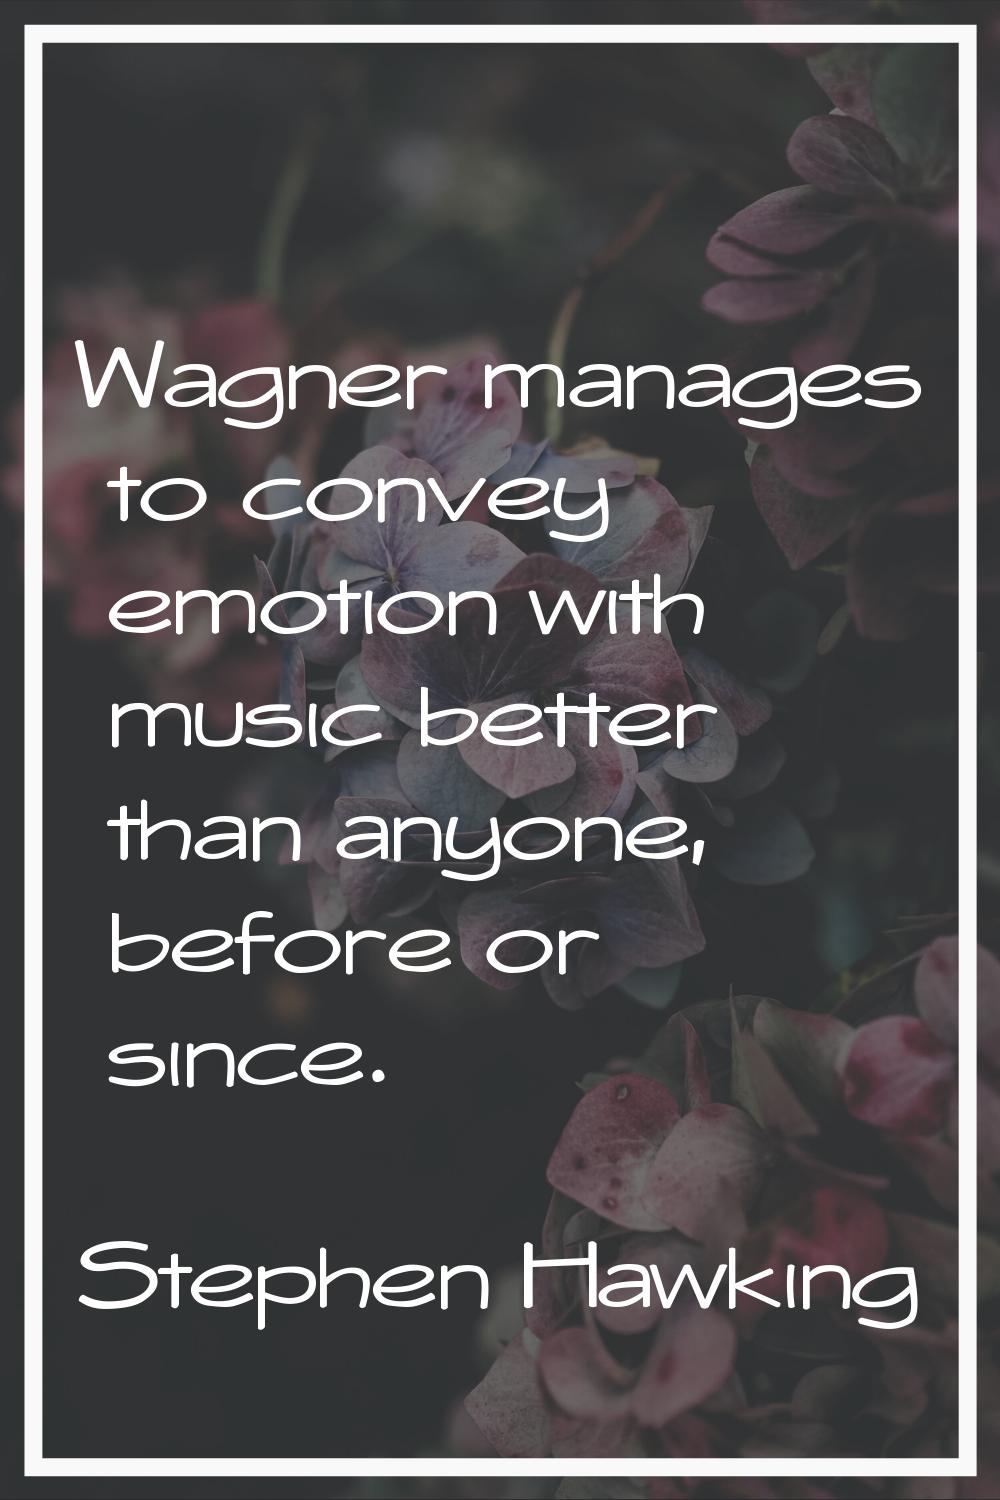 Wagner manages to convey emotion with music better than anyone, before or since.